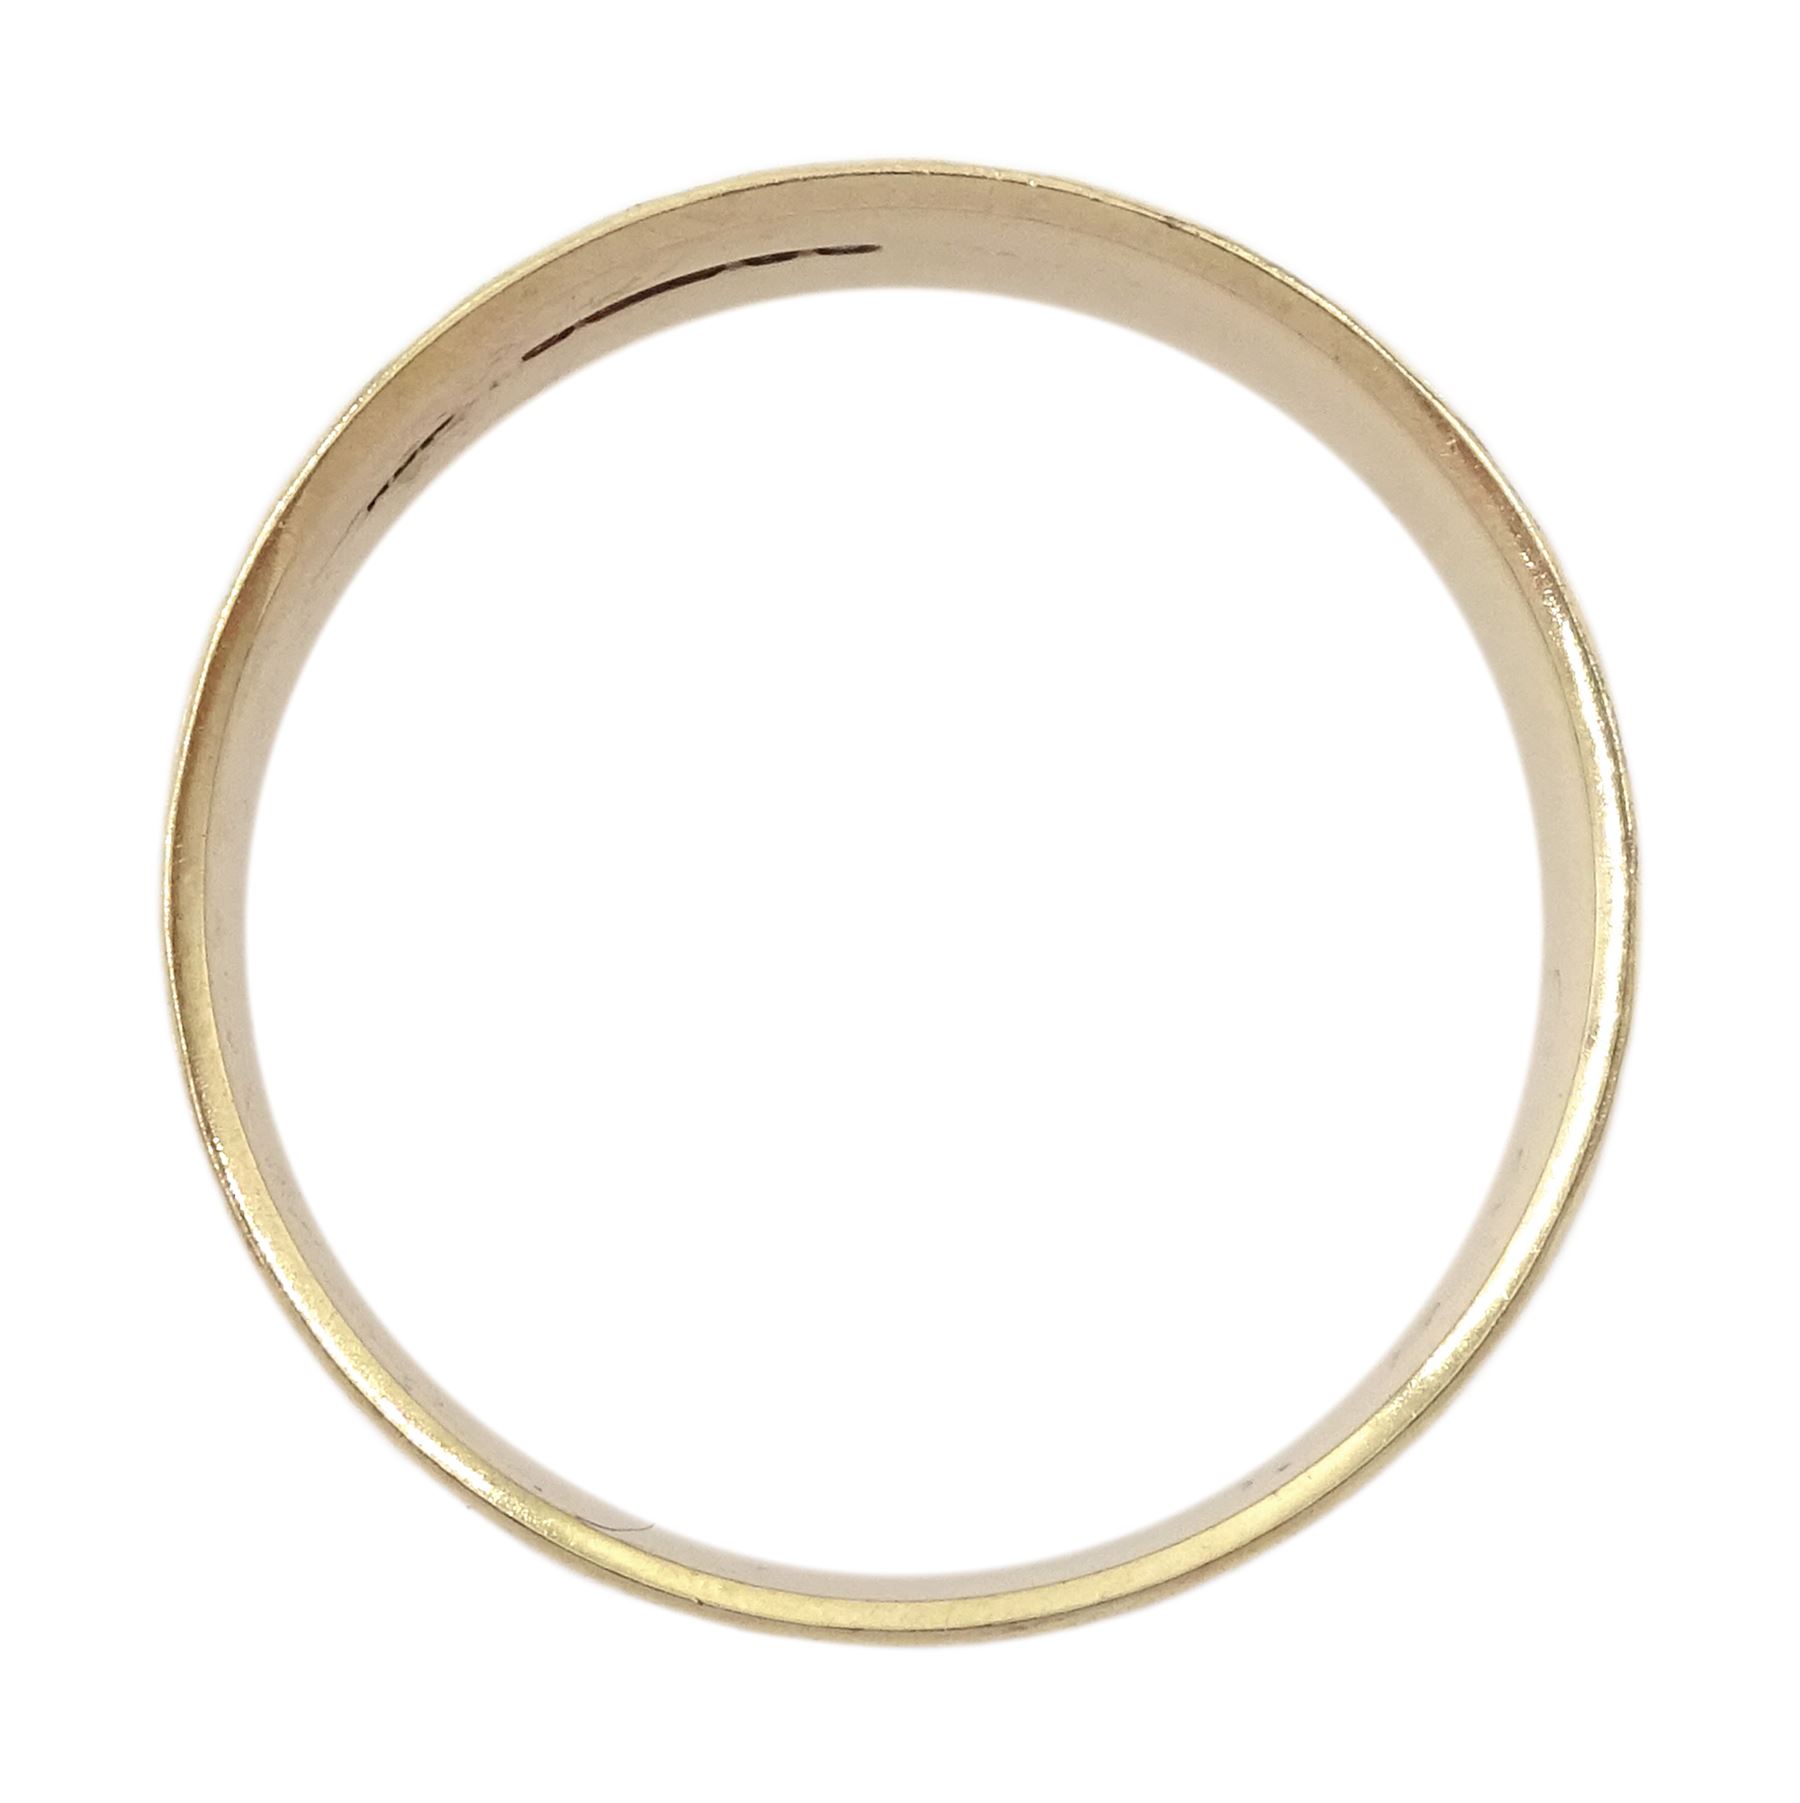 9ct gold wide wedding band - Image 3 of 3